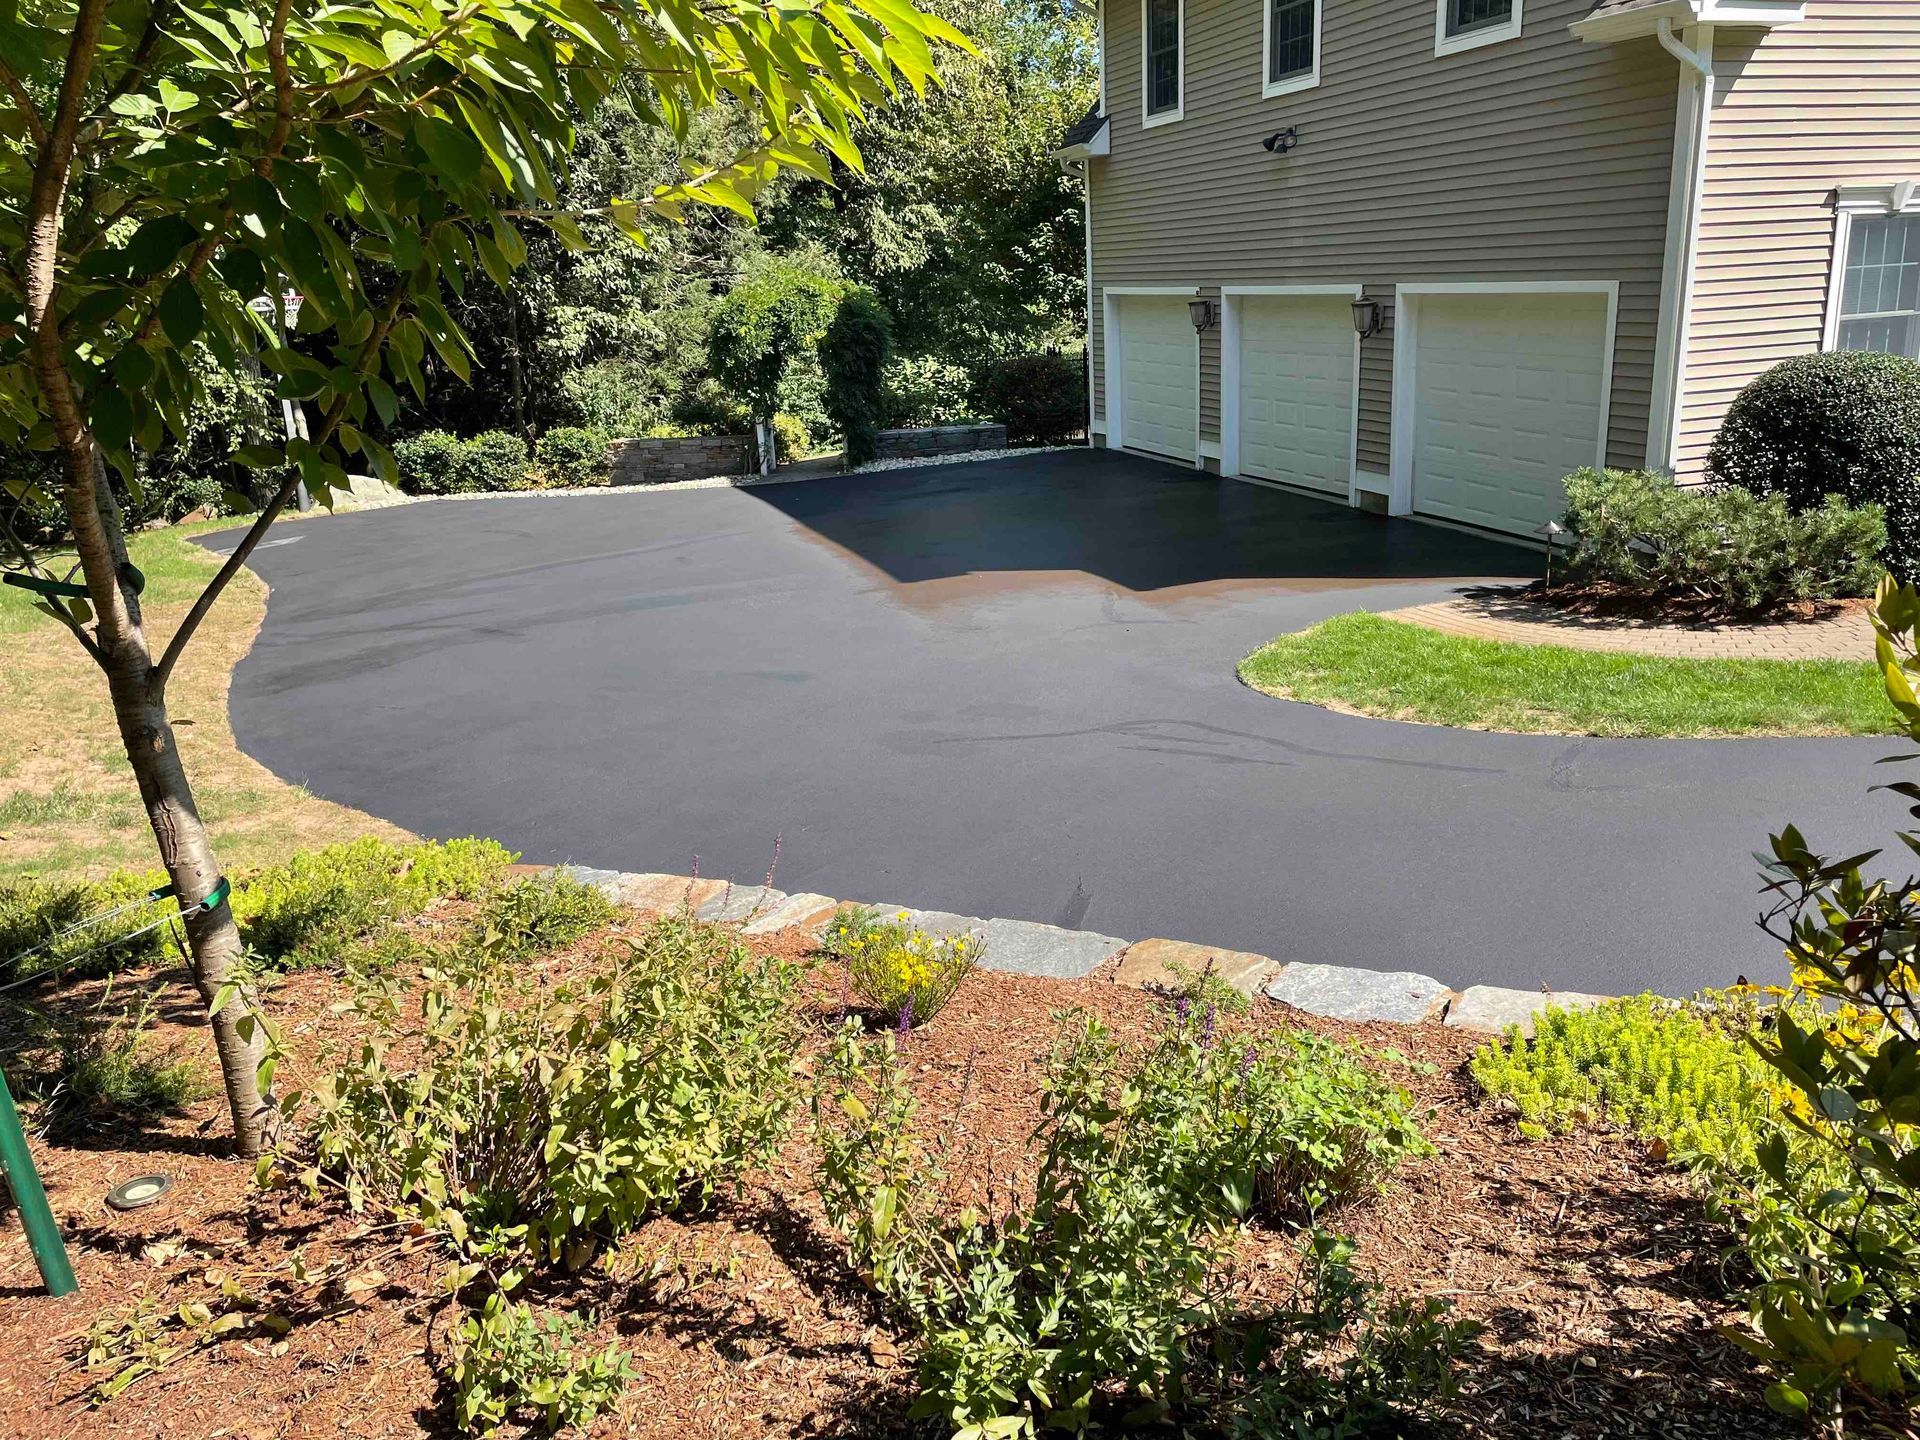 seal coating and crack filling service for residential driveway in west hartford, Connecticut landscape solutions.